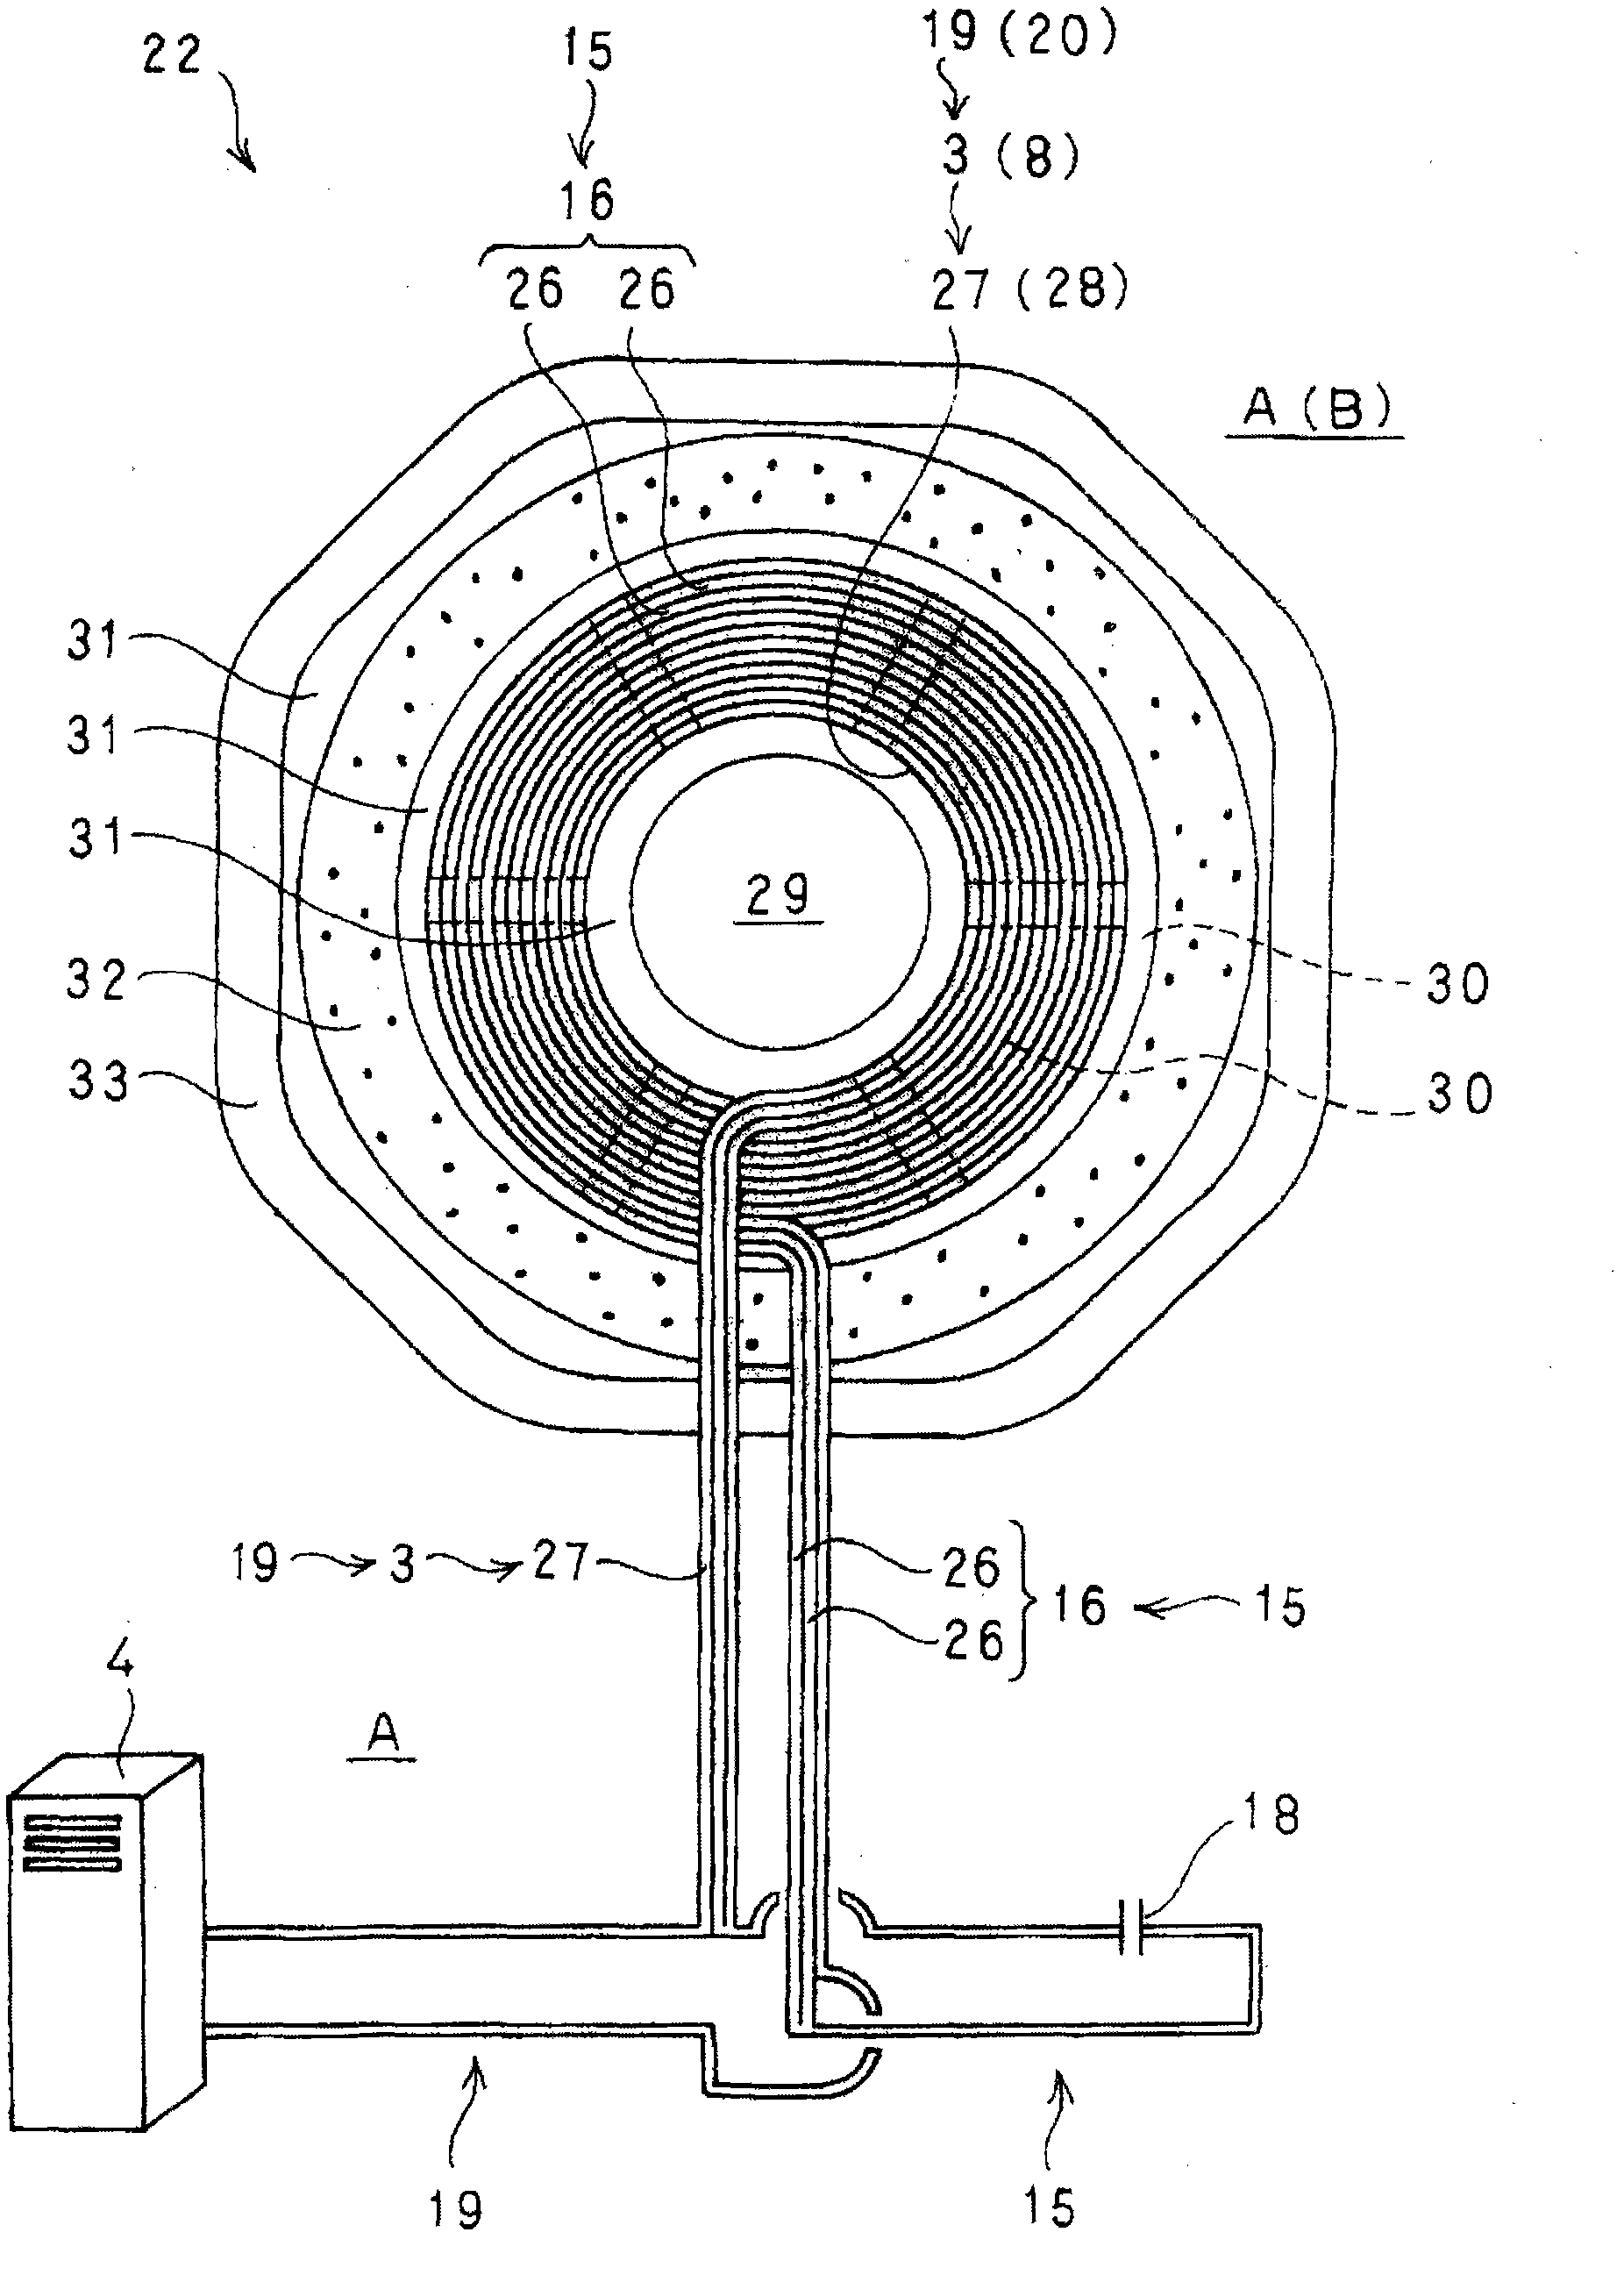 Contactless power supply device